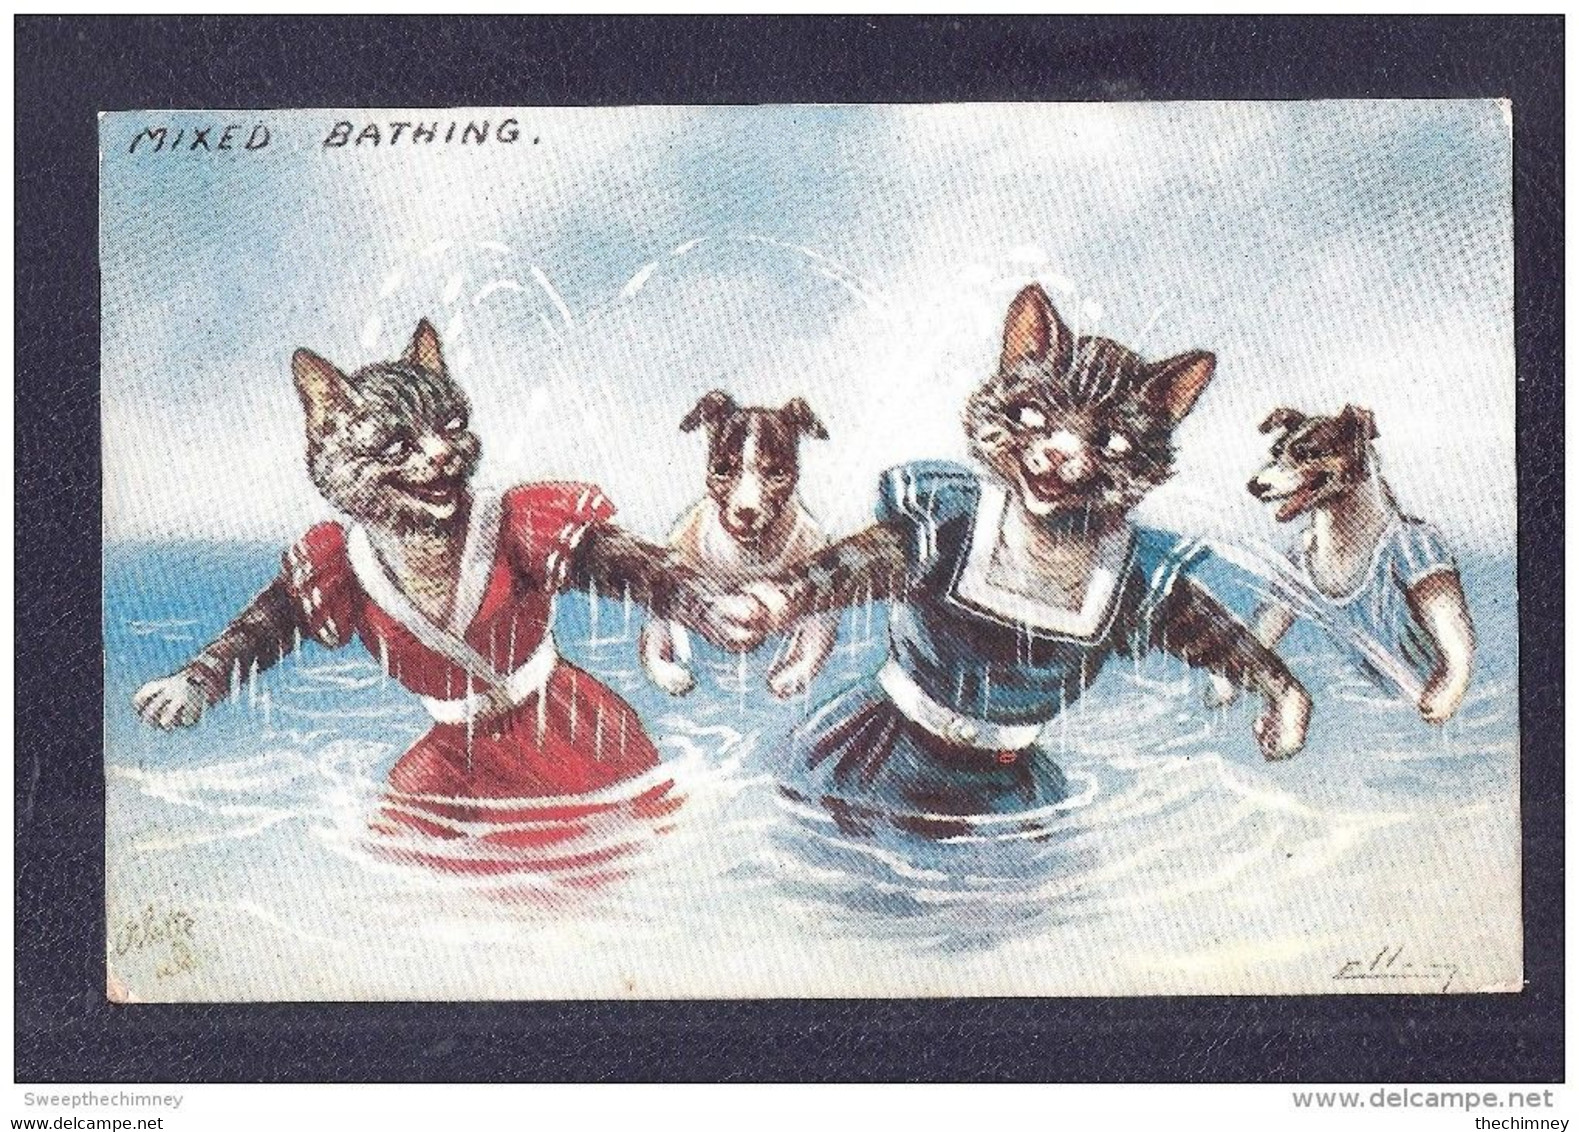 Chat CAT CATS  A La Mer, Mixed Bathing, Illustrateur Ellam, Raphael Tuck, Oilette USED 1909 + STAMP TIMBRE - Gatos